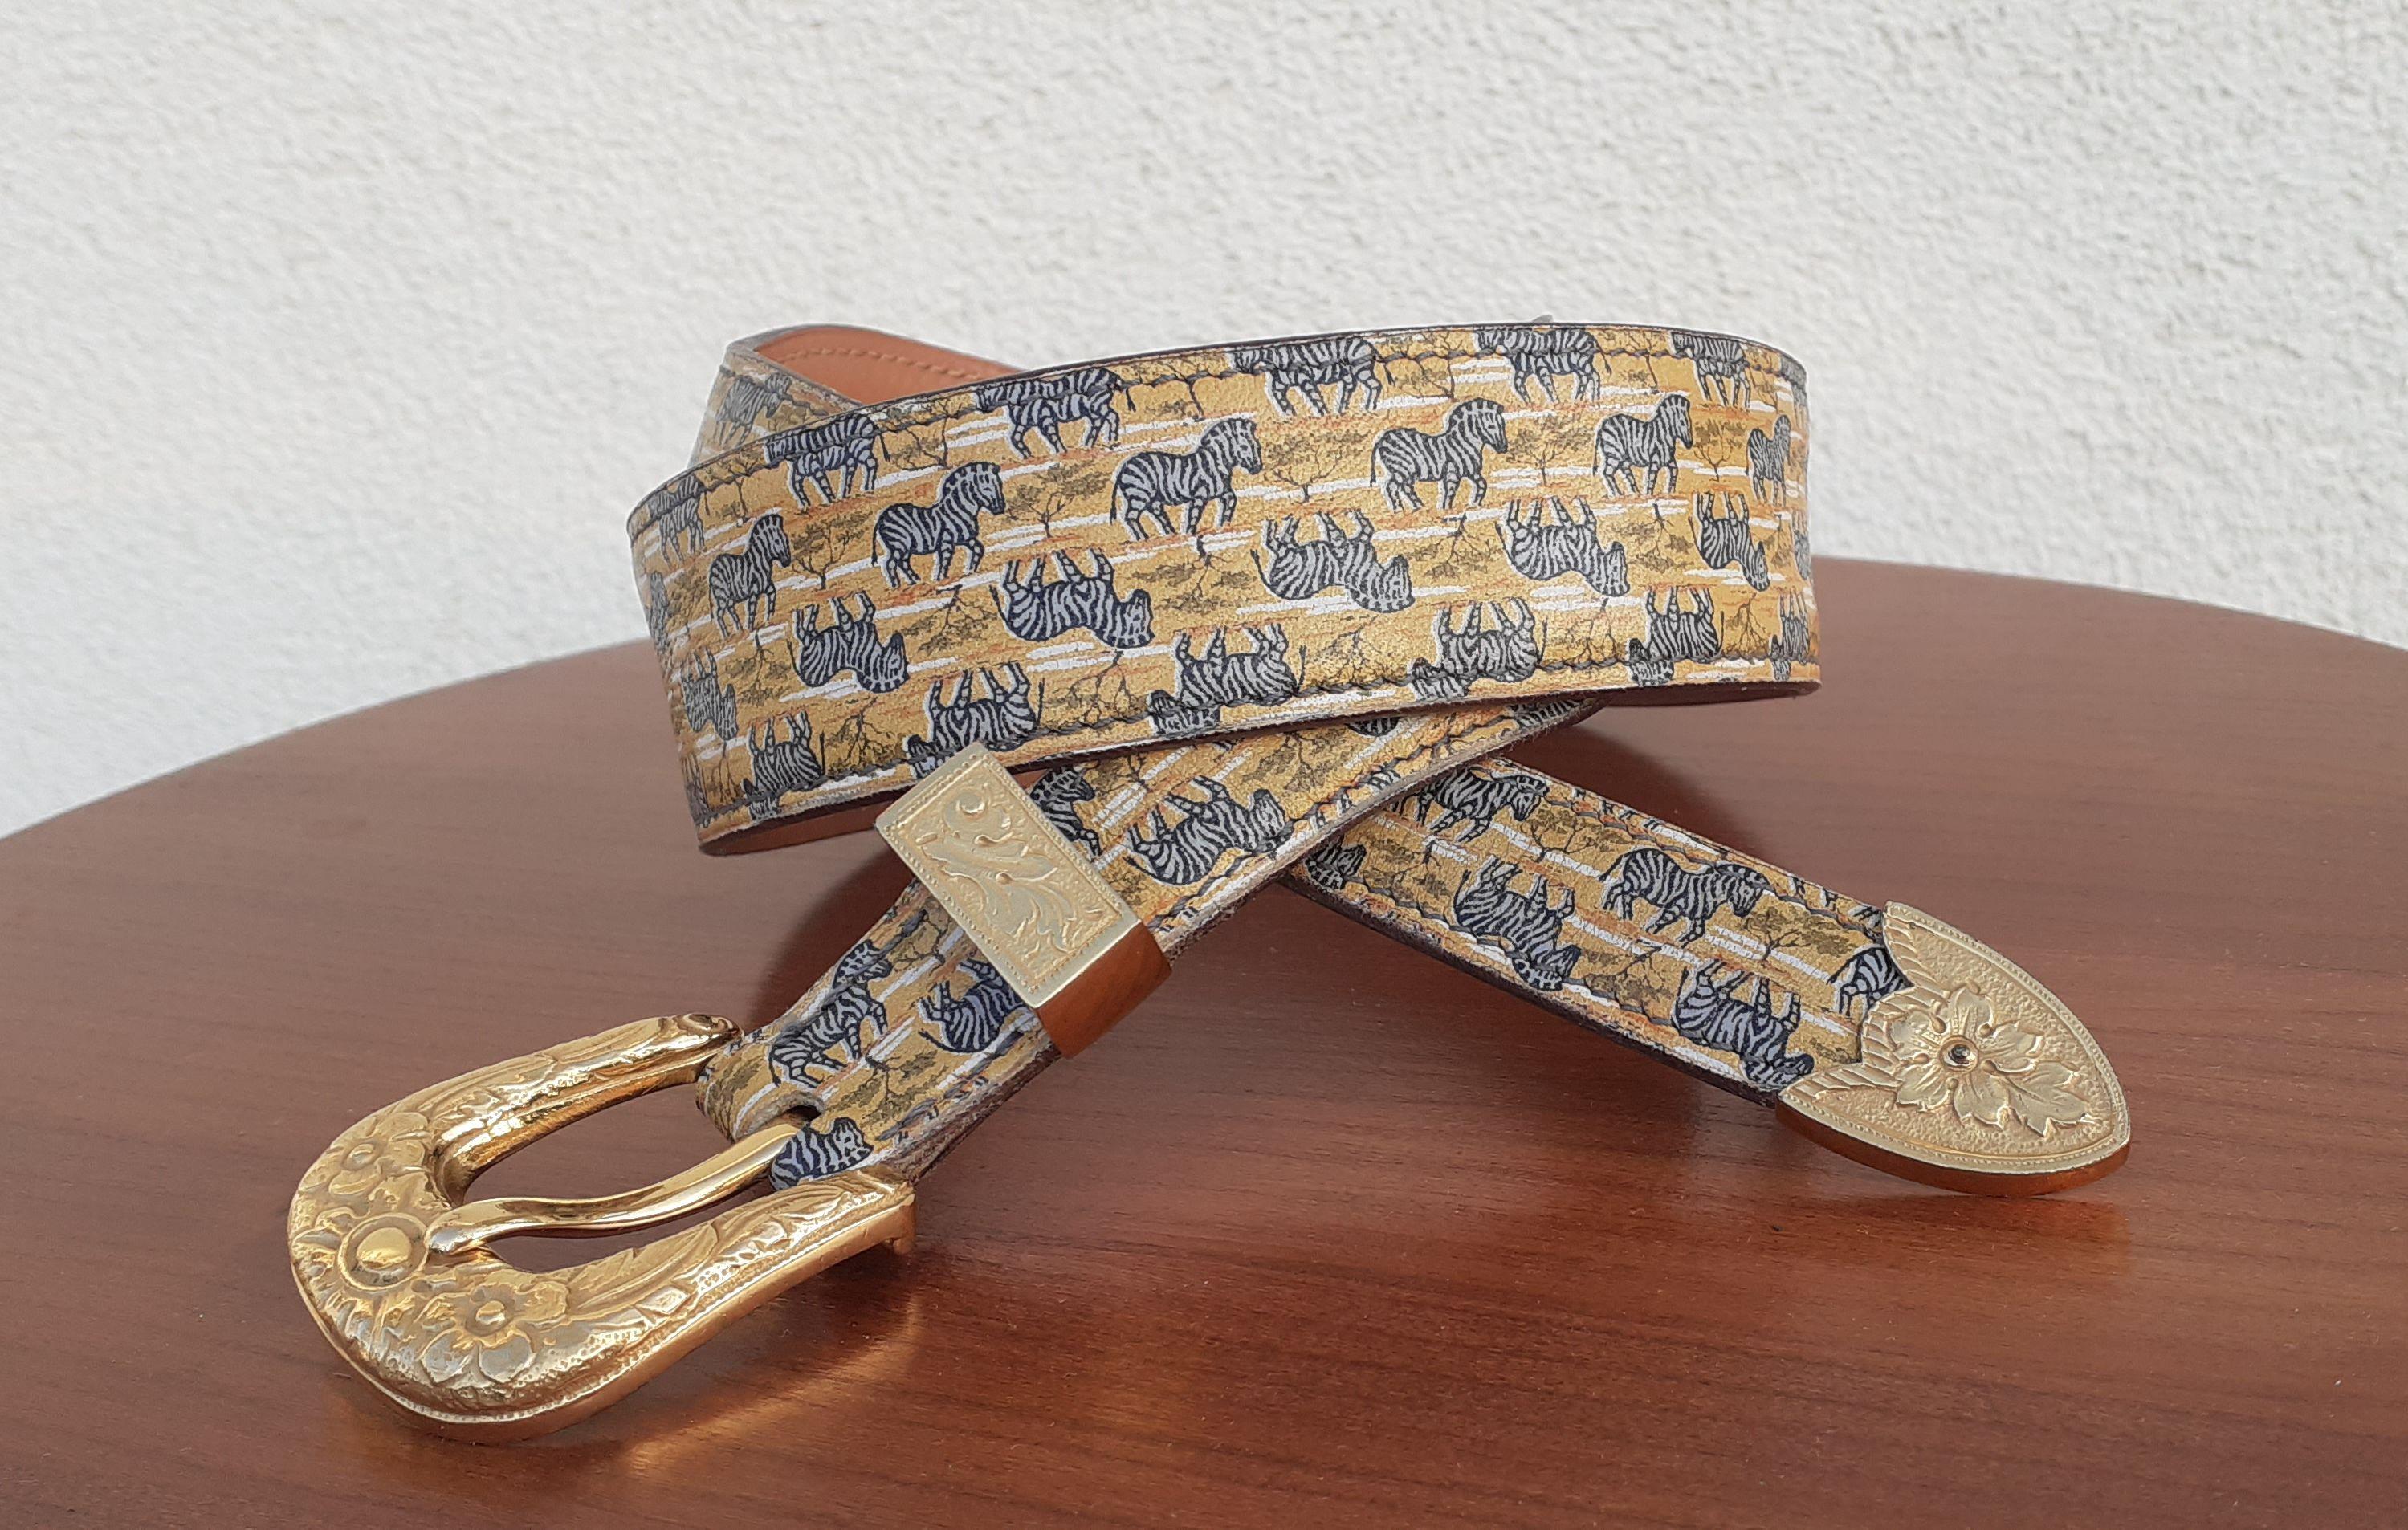 Rare and Lovely Authentic Hermès Belt

Print: zebras in the savannah

From the 